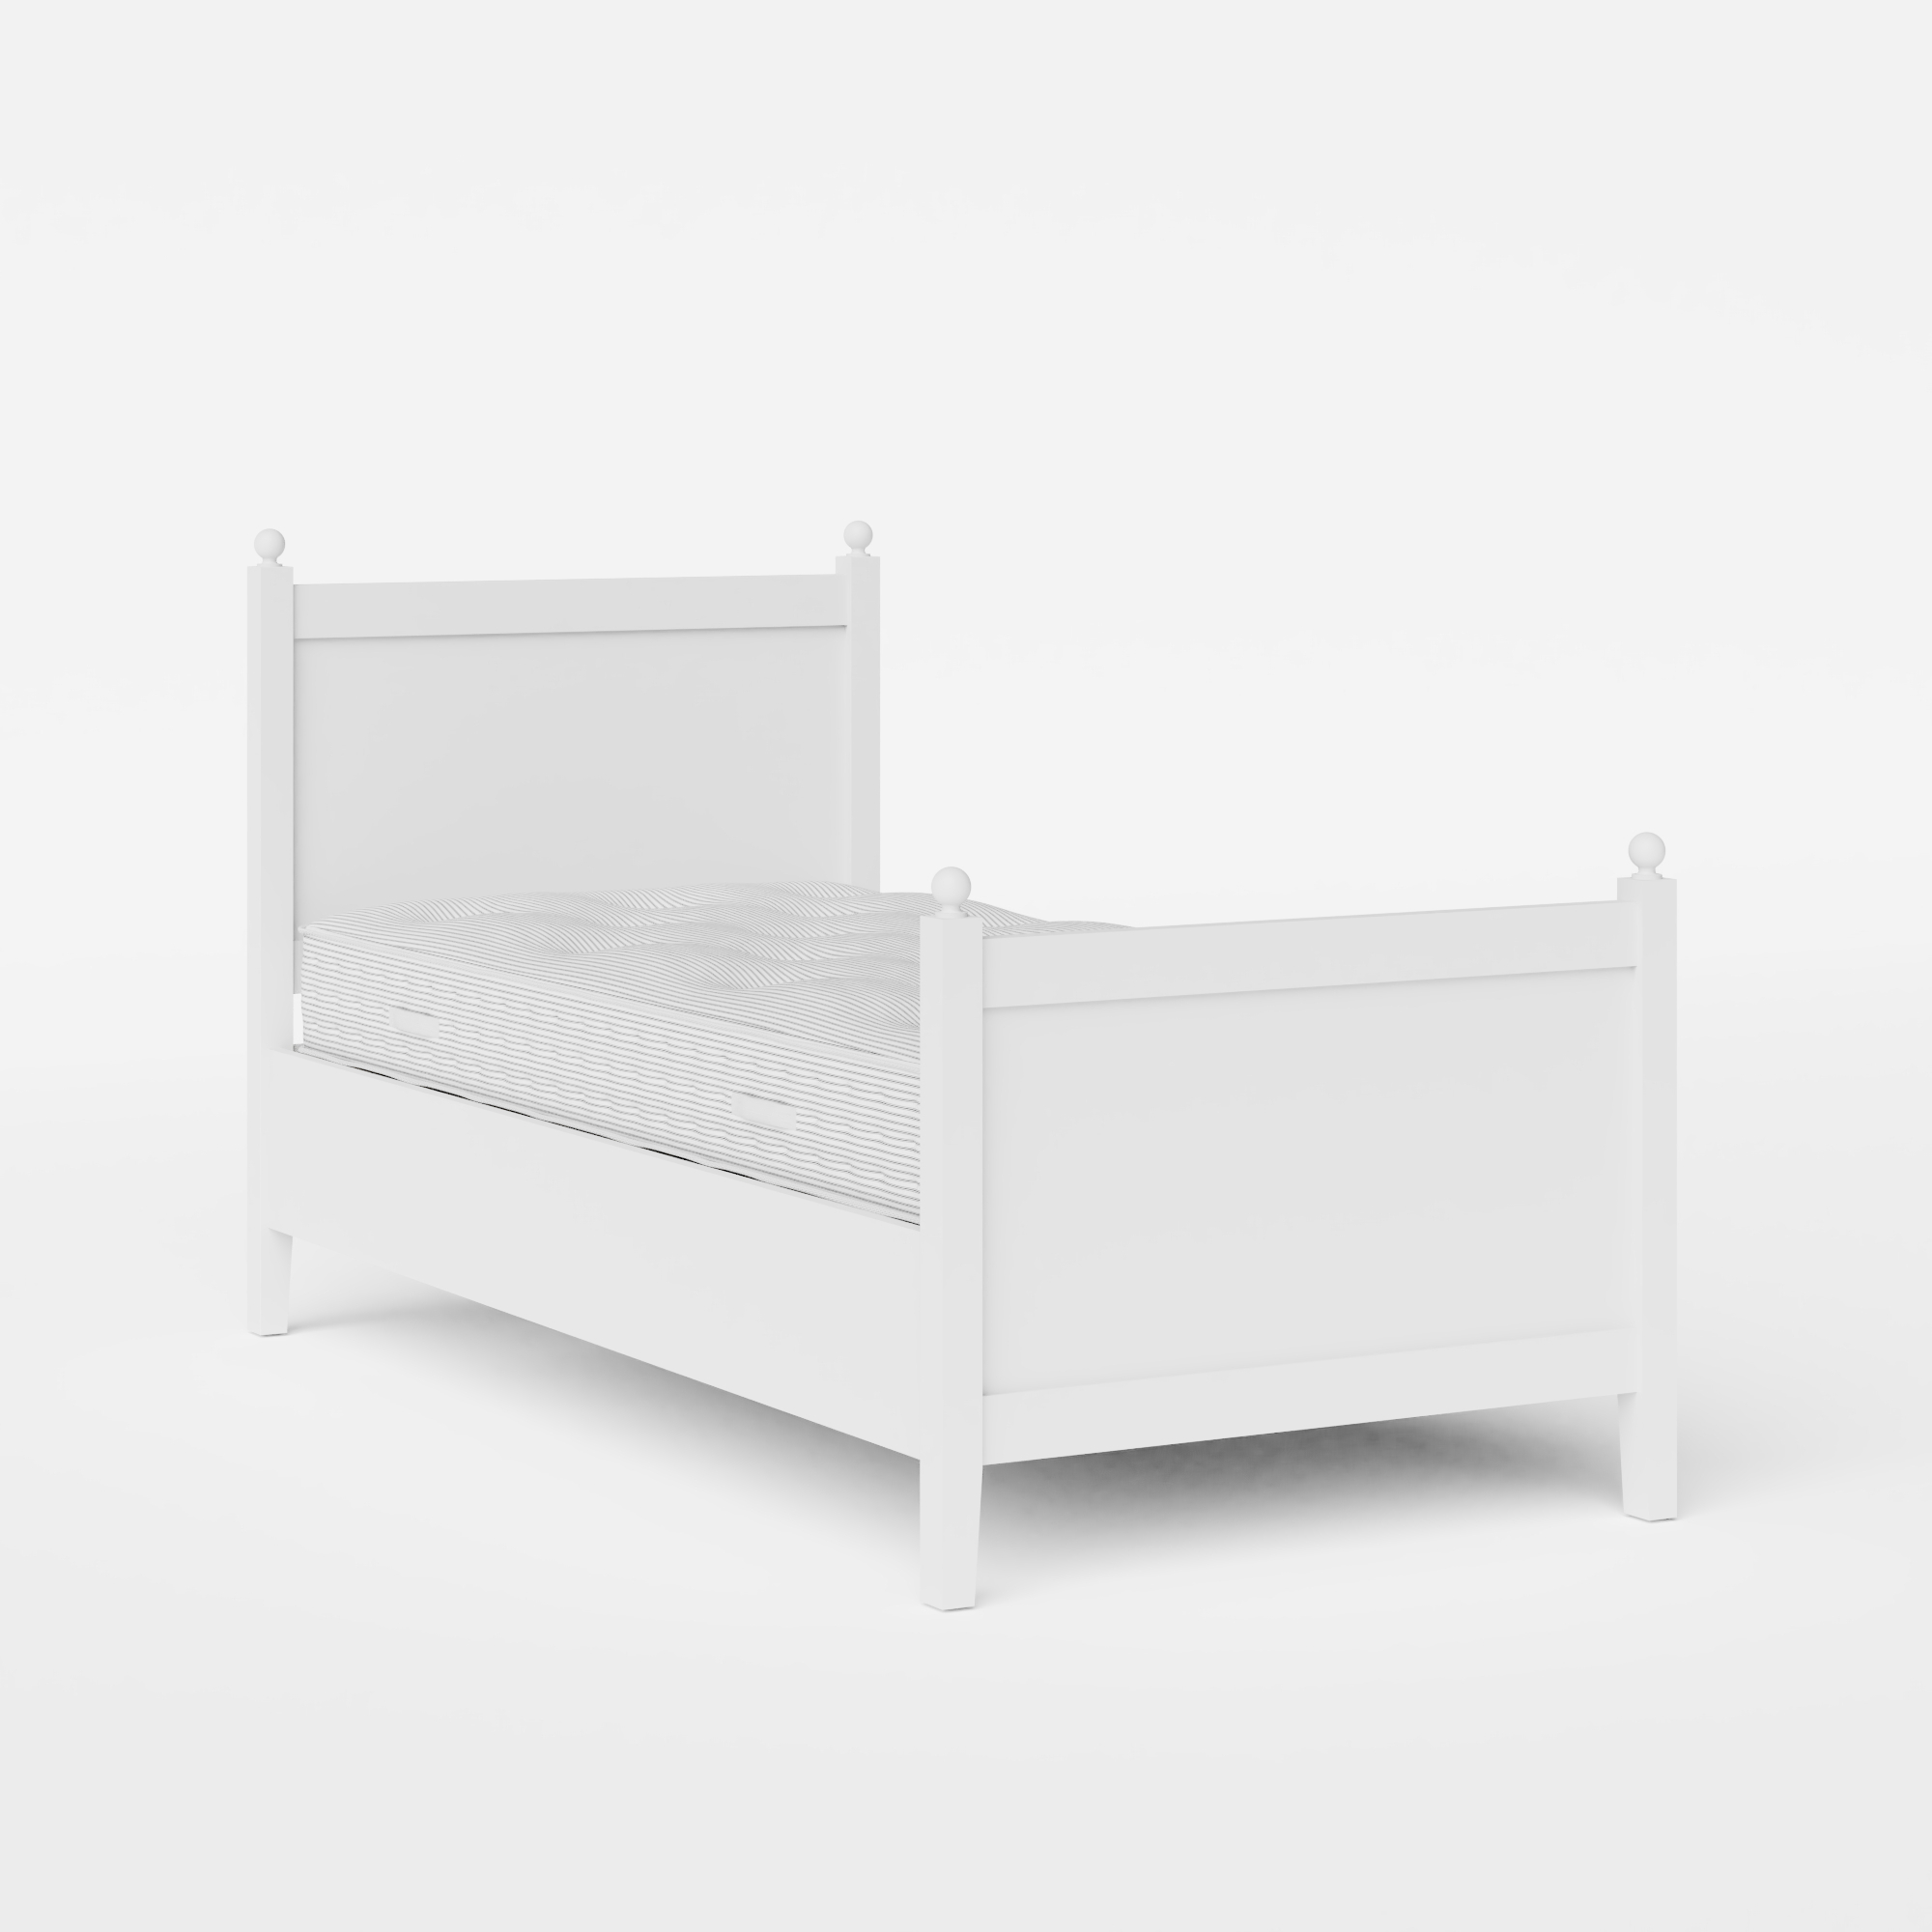 Marbella Painted single painted wood bed in white with Juno mattress